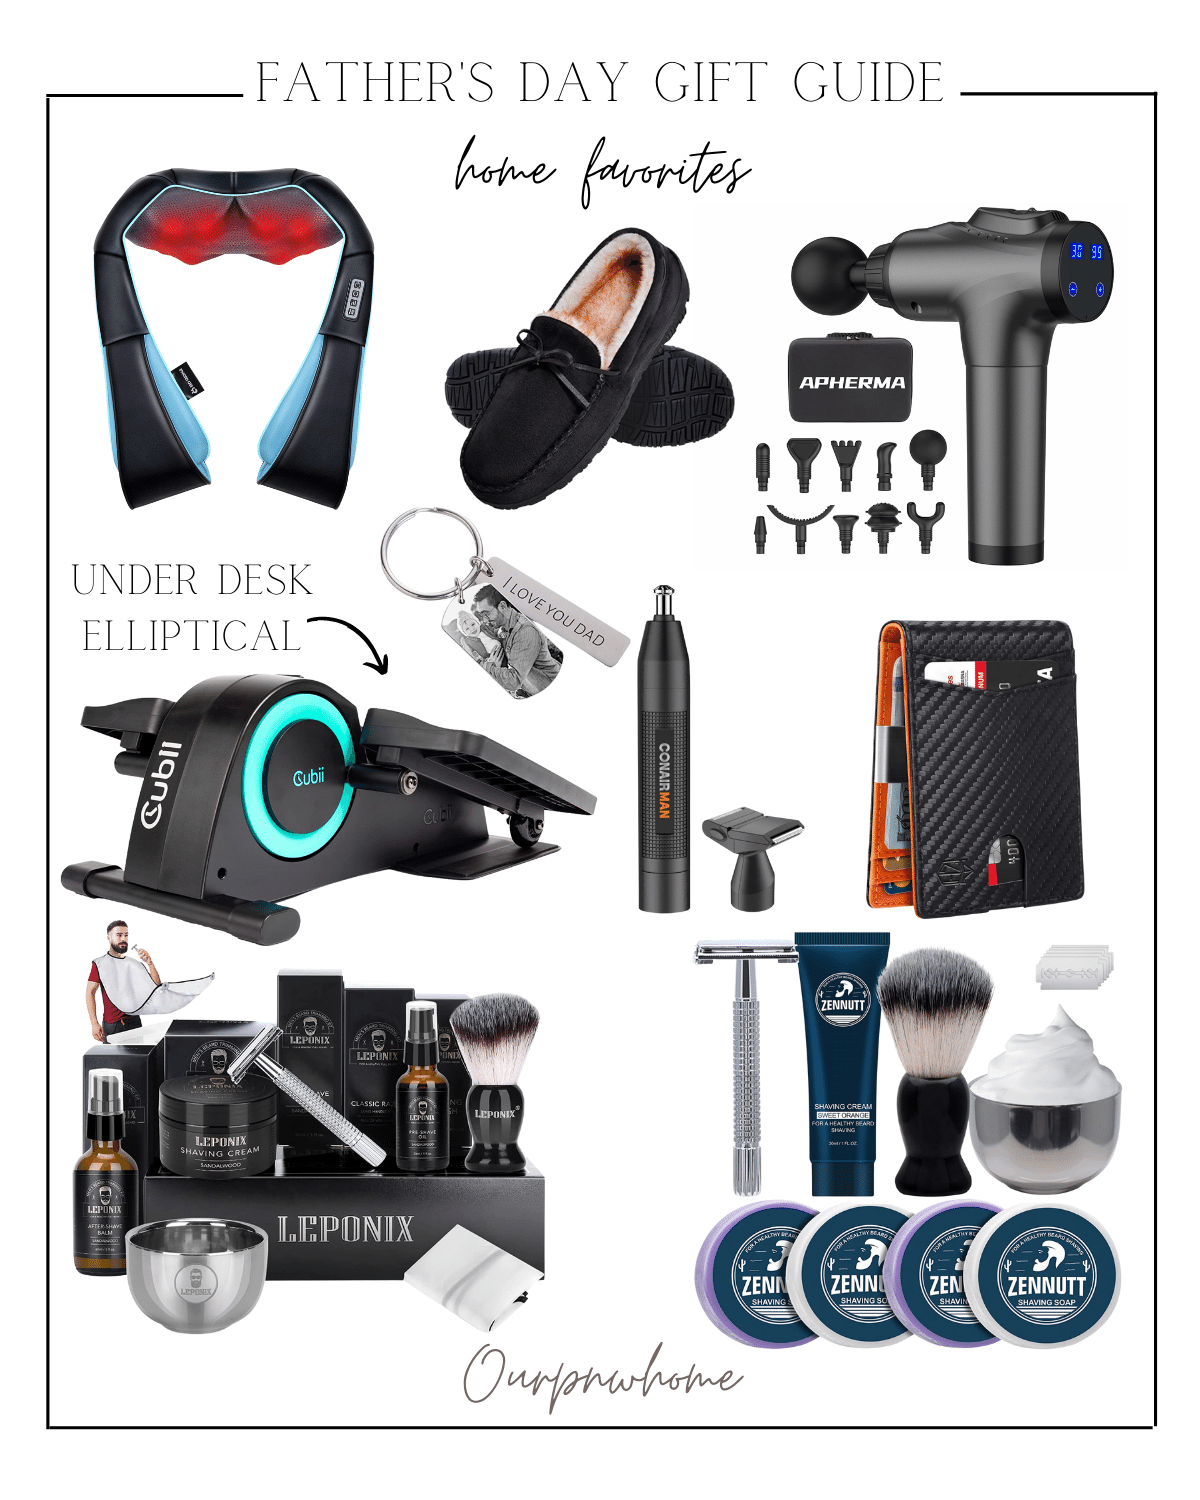 fathers day gift guide, home favorites, gifts for him, gifts for men, beard care kit 